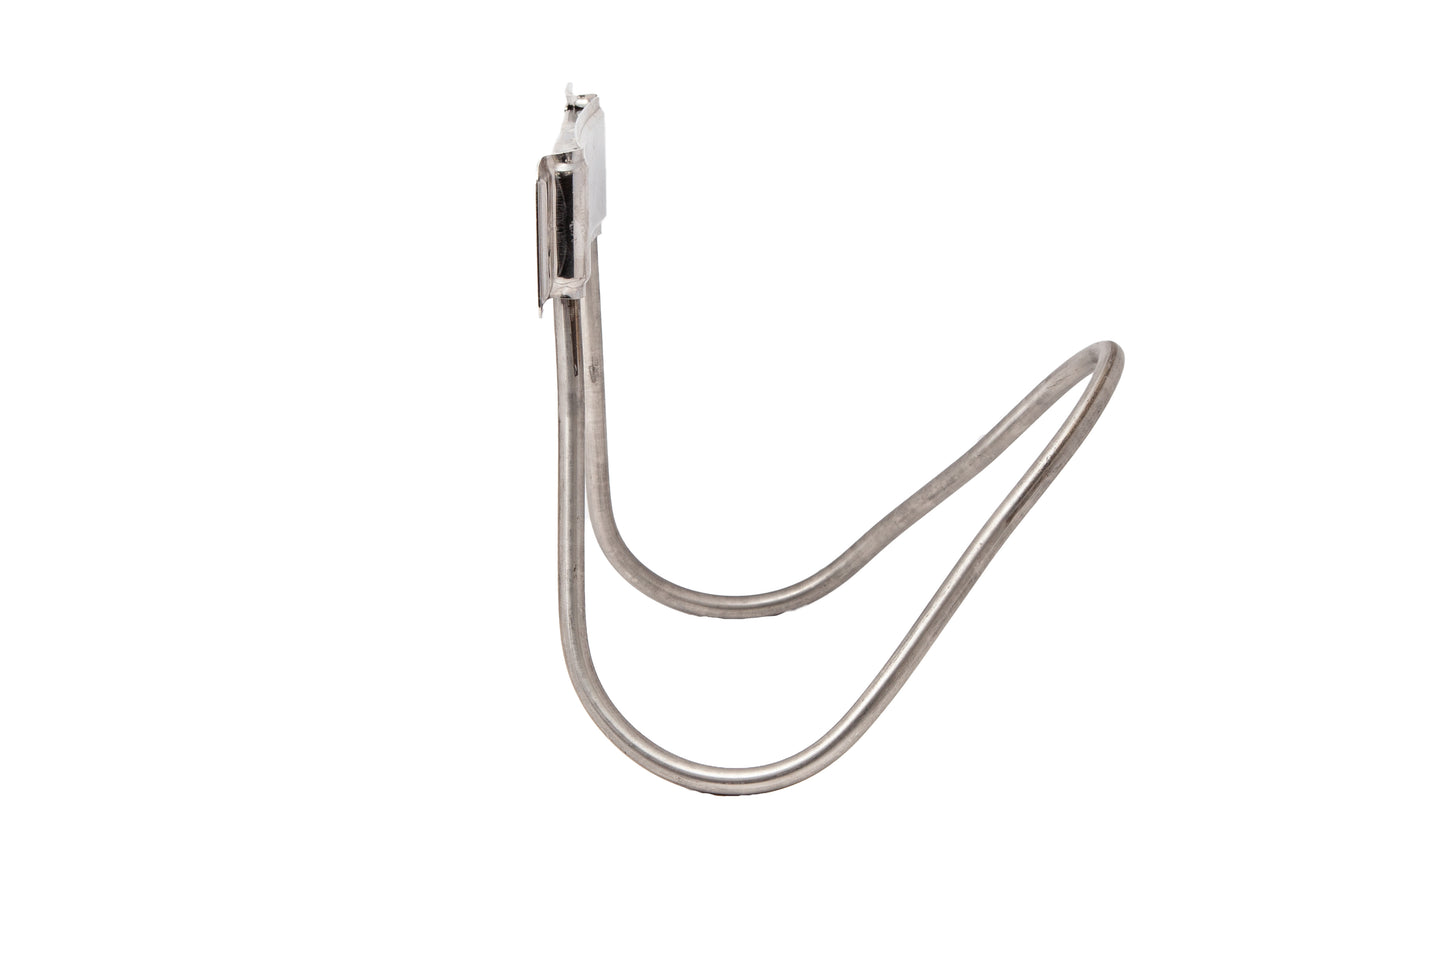 STAINLESS STEEL WALL MOUNT HOSE HANGER LARGE